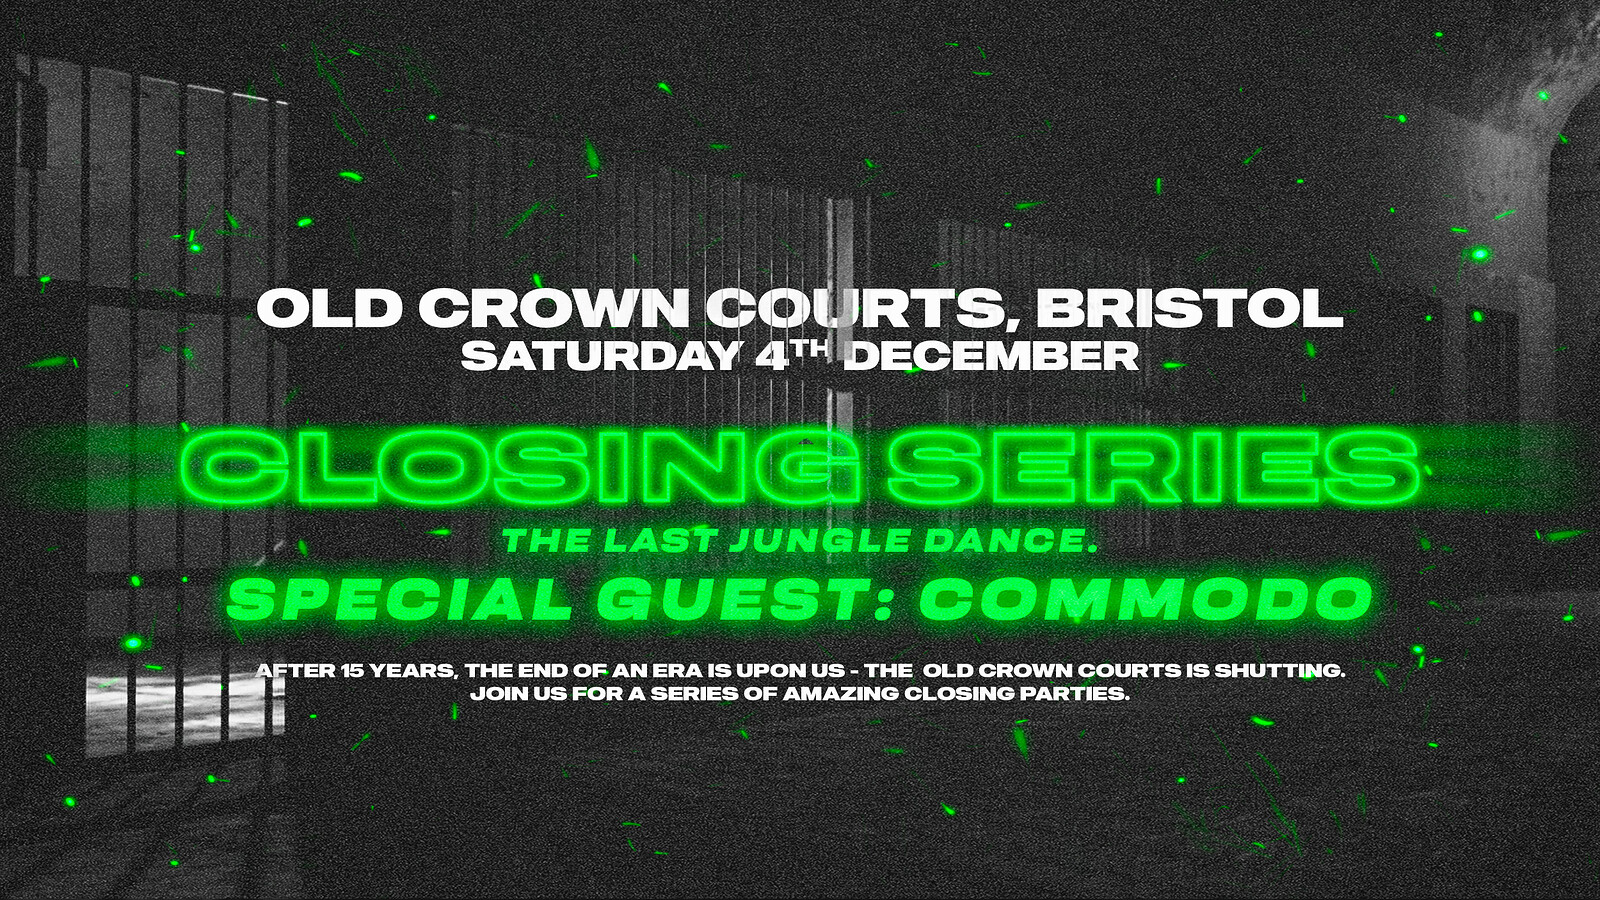 OCC Closing Rave • The Last Jungle Dance w Commodo at The Old Crown Courts